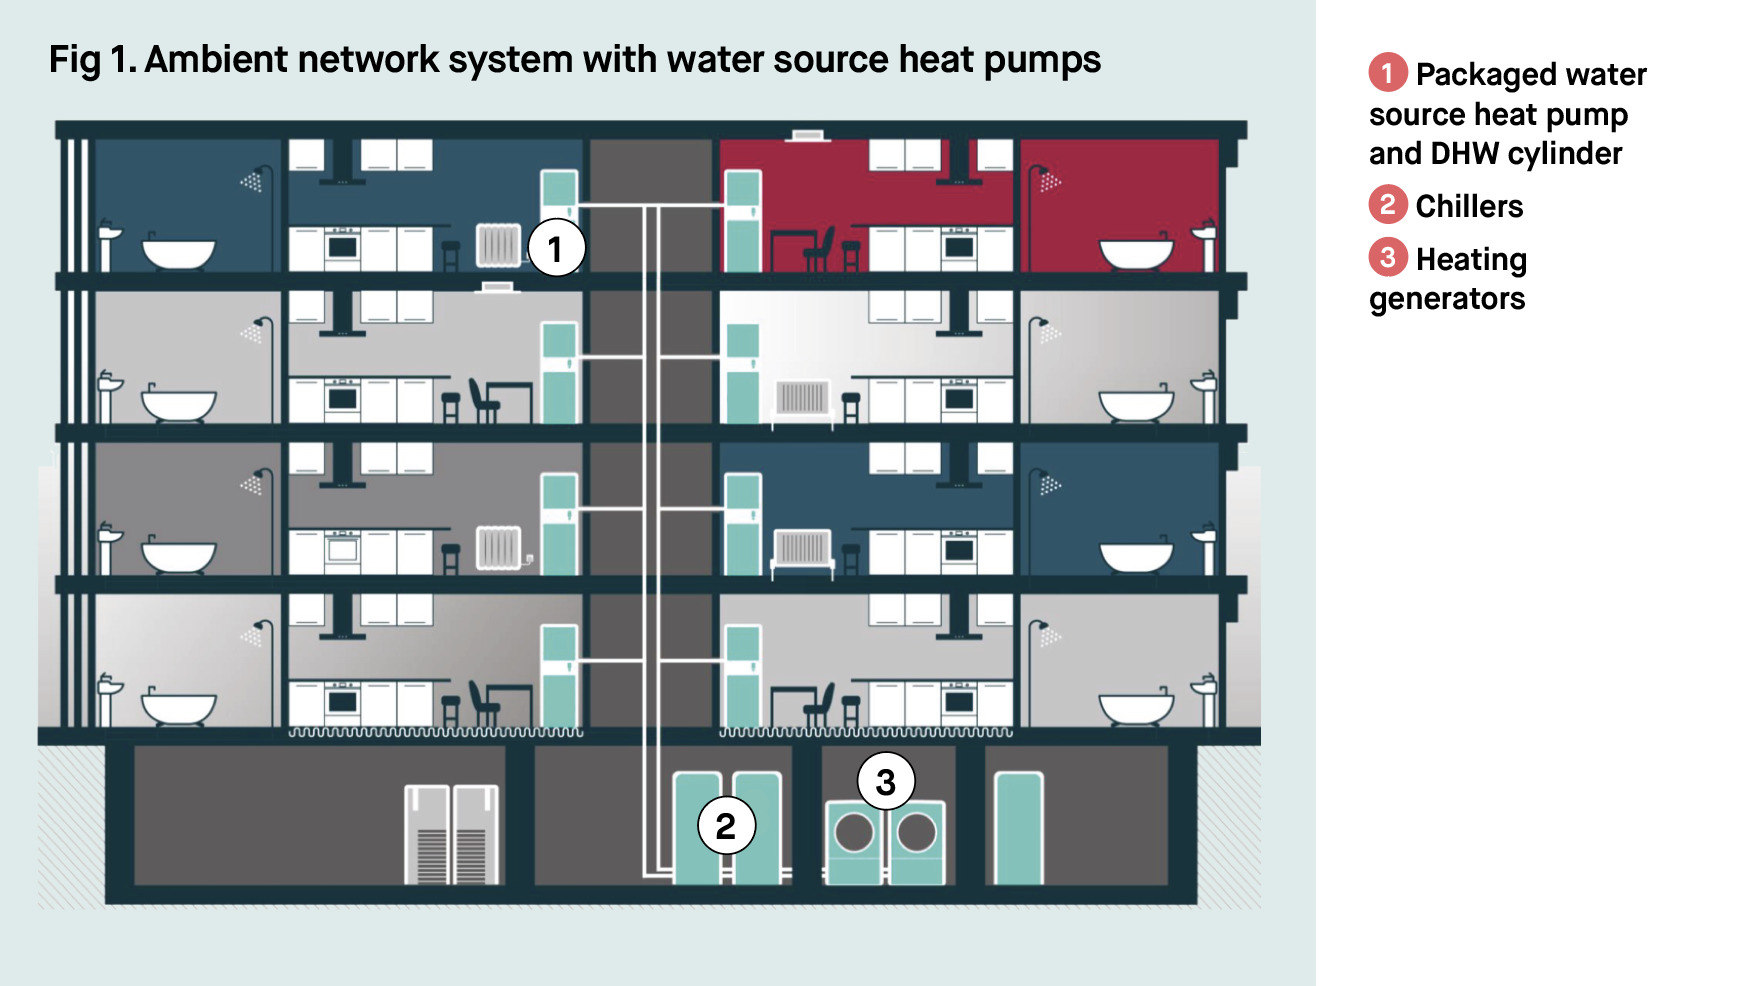 Fig 1. Ambient network system with water source heat pumps